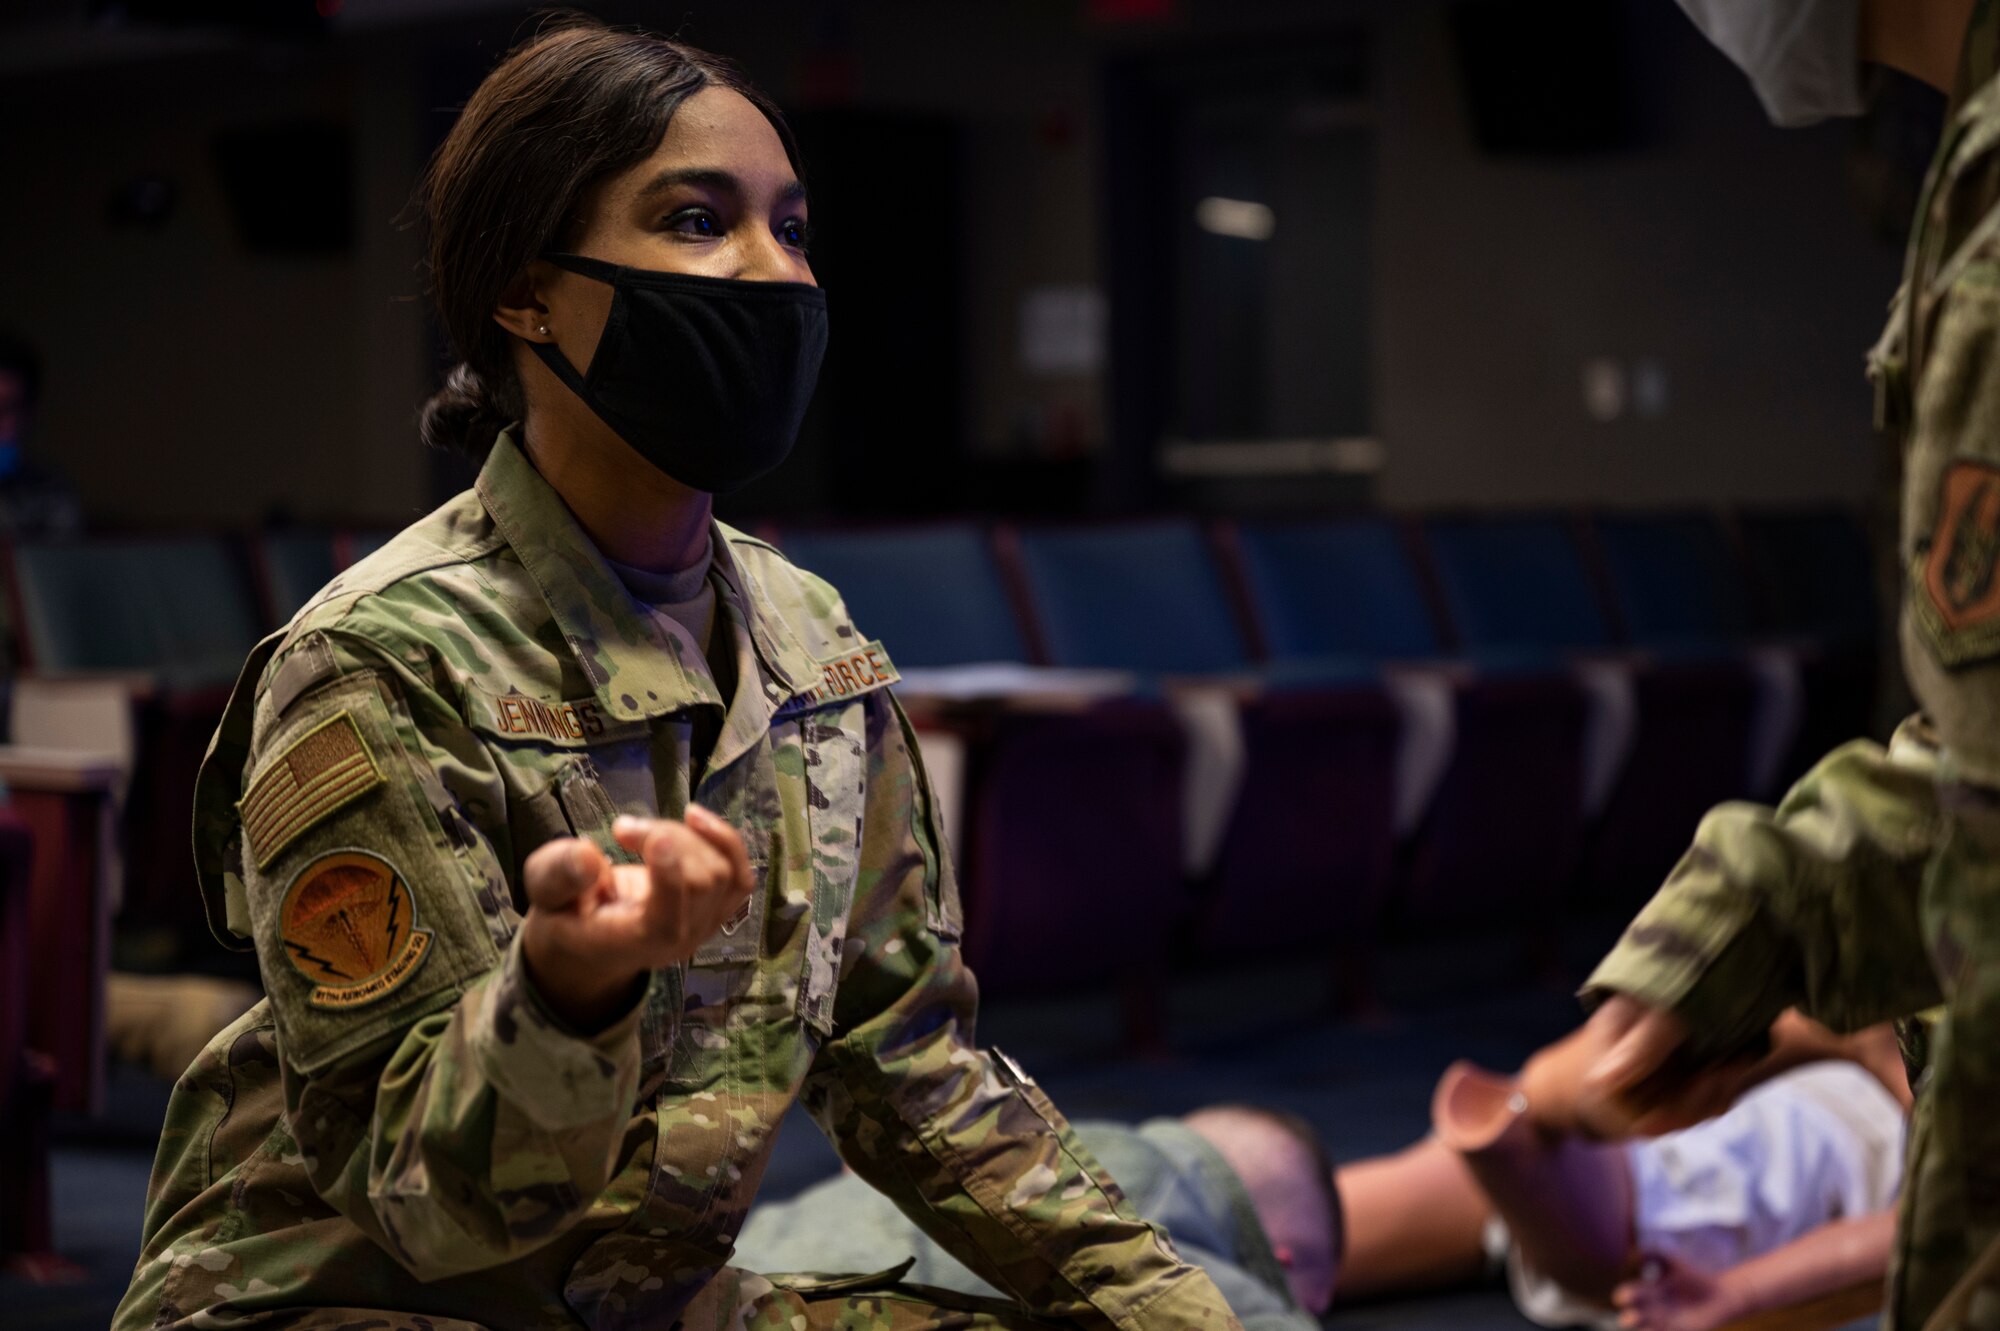 Senior Airman Jordan Jennings, 911th Aeromedical Staging Squadron medical technician, explains the next step in the process of administering medical aid to an assessor during an exercise at the Pittsburgh International Airport Air Reserve Station, Pennsylvania, Dec. 9, 2020.